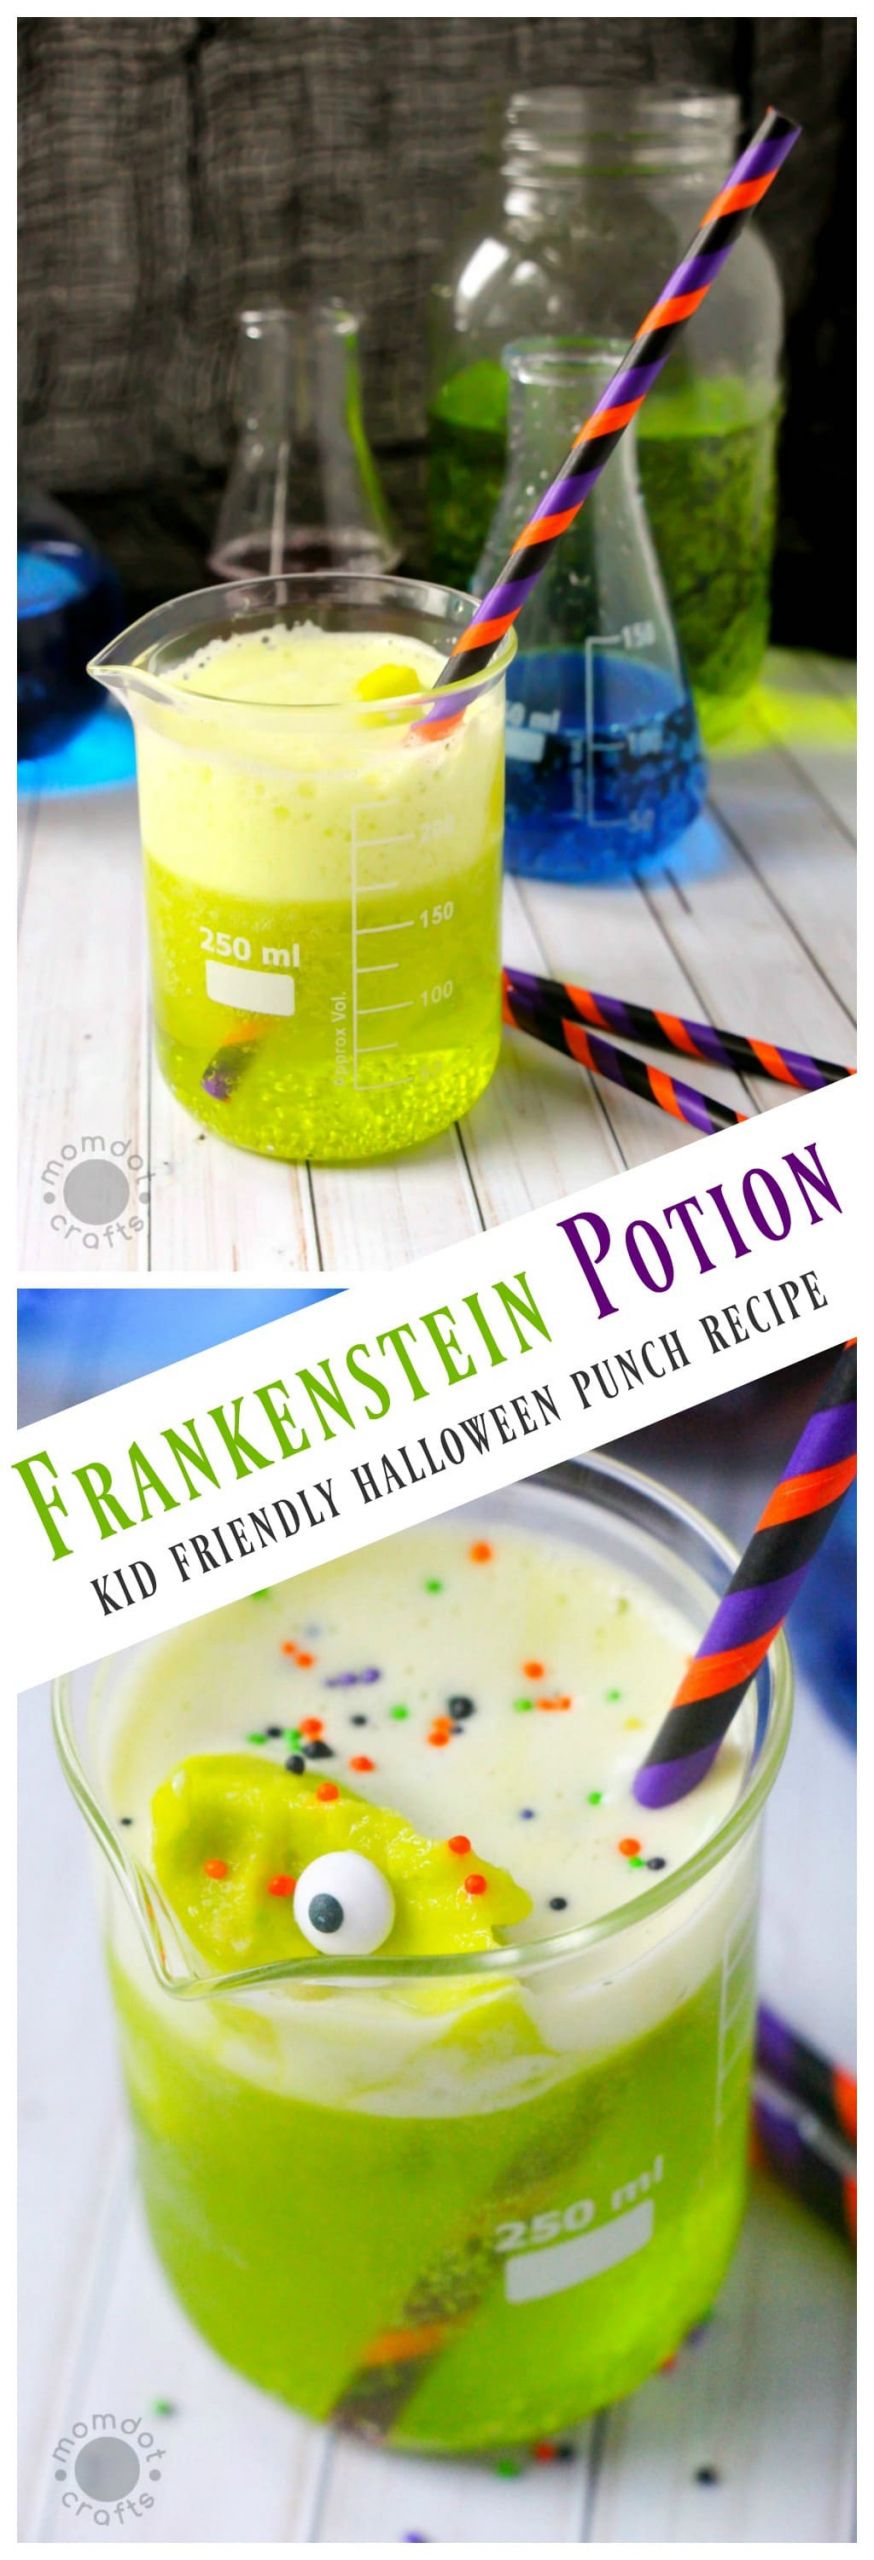 Kid Friendly Punch Bowl Recipes
 Frankenstein Punch Halloween Punch for Kids MomDot